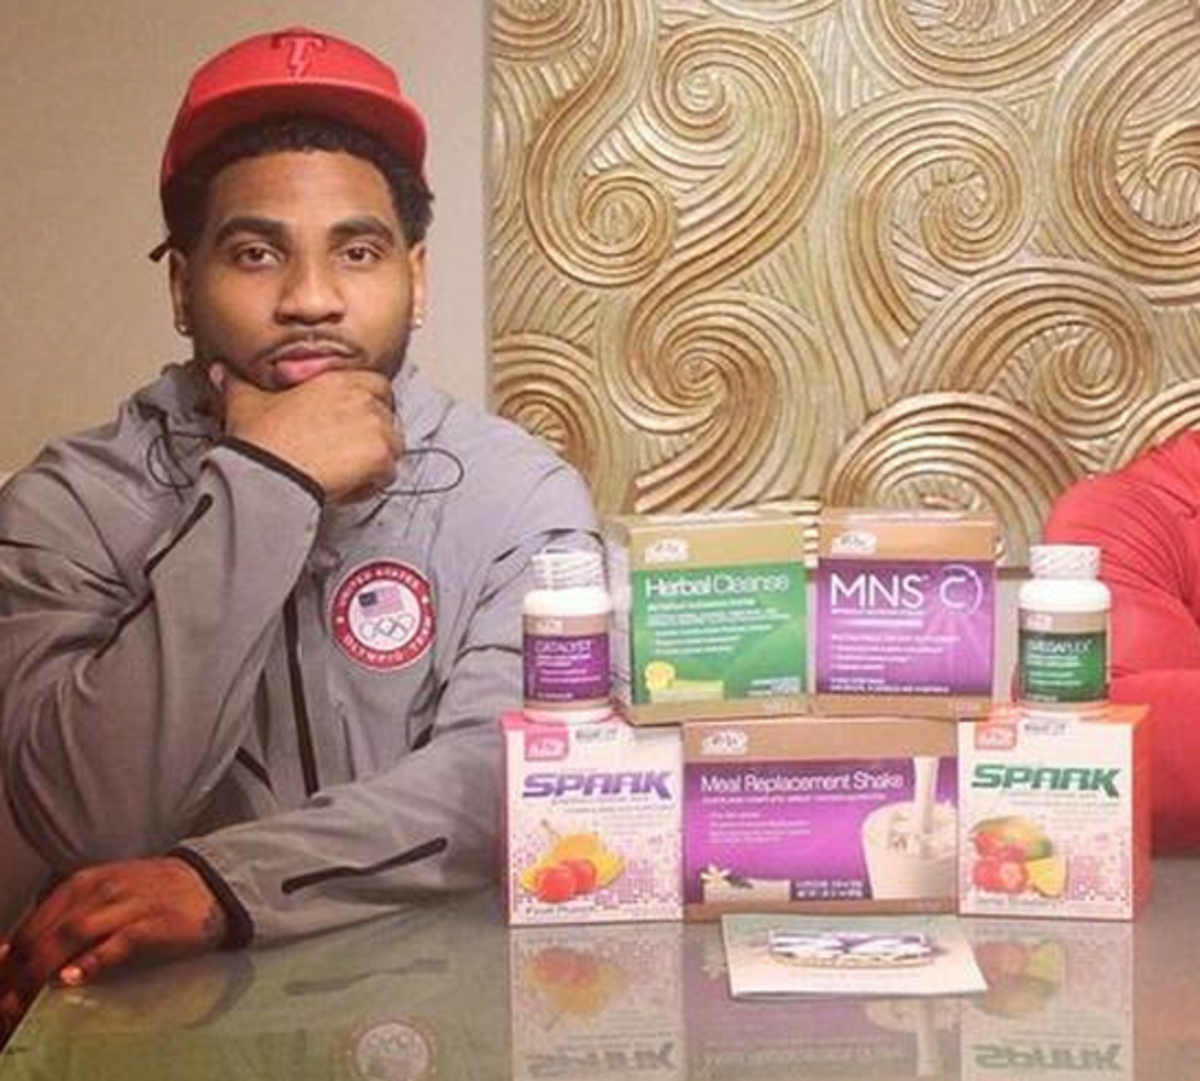 Braxton Miller selling supplements could be NCAA violation.